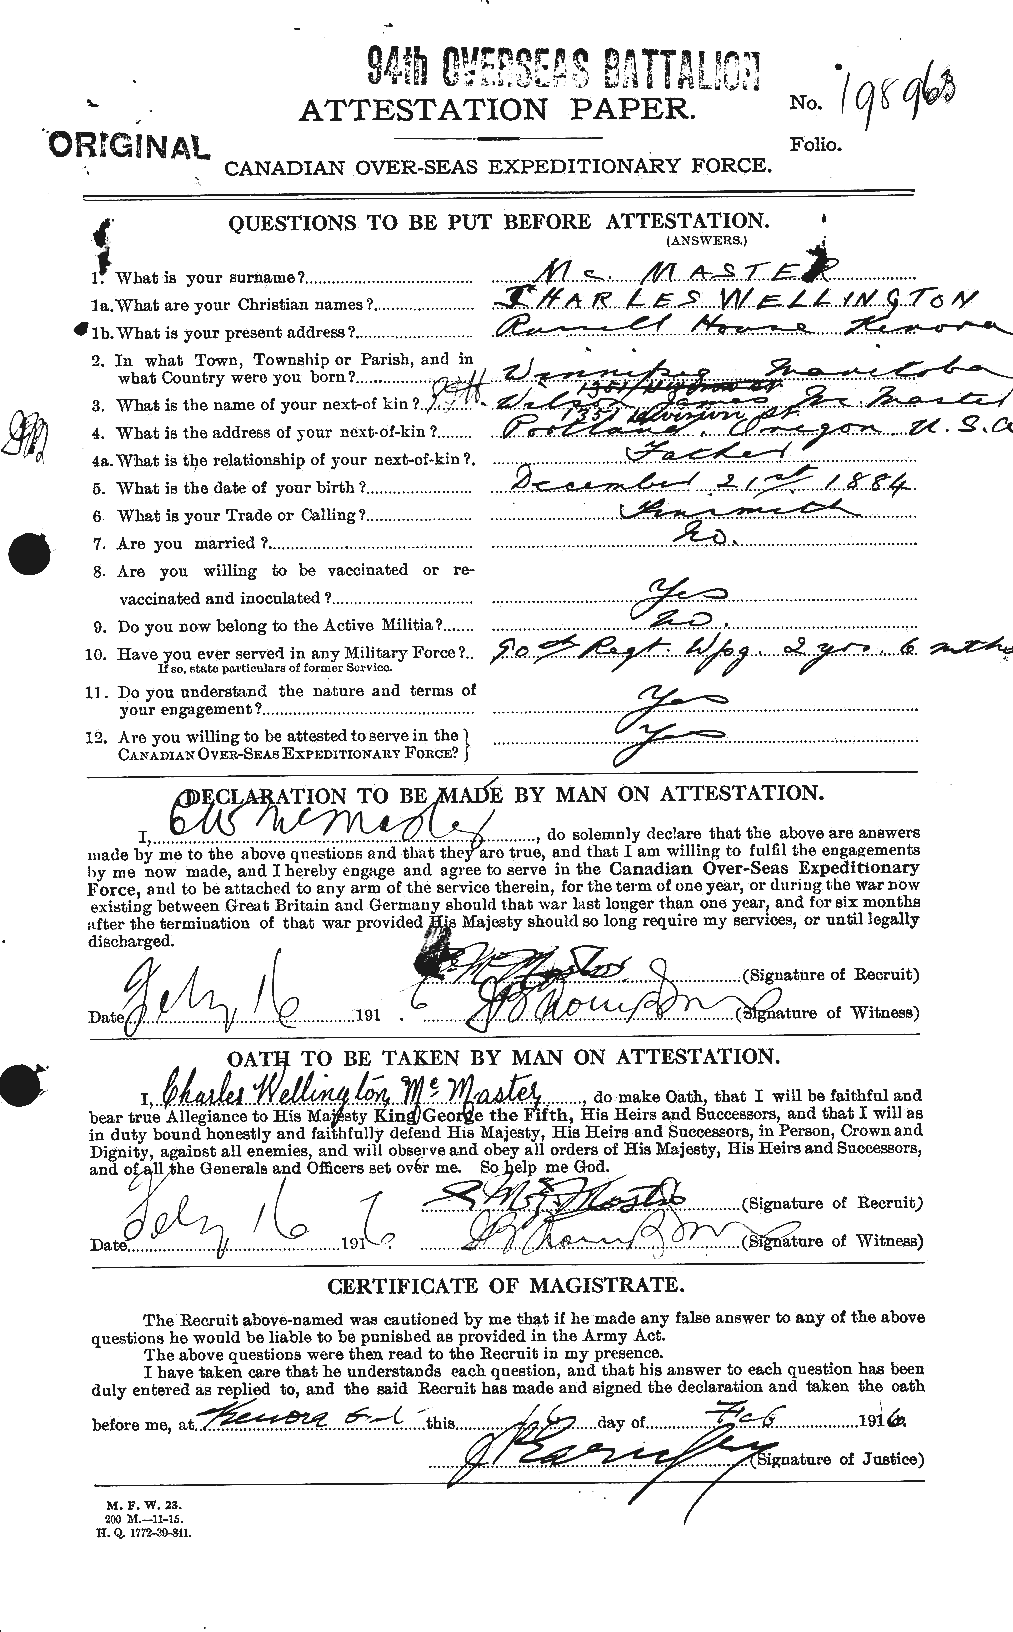 Personnel Records of the First World War - CEF 539911a